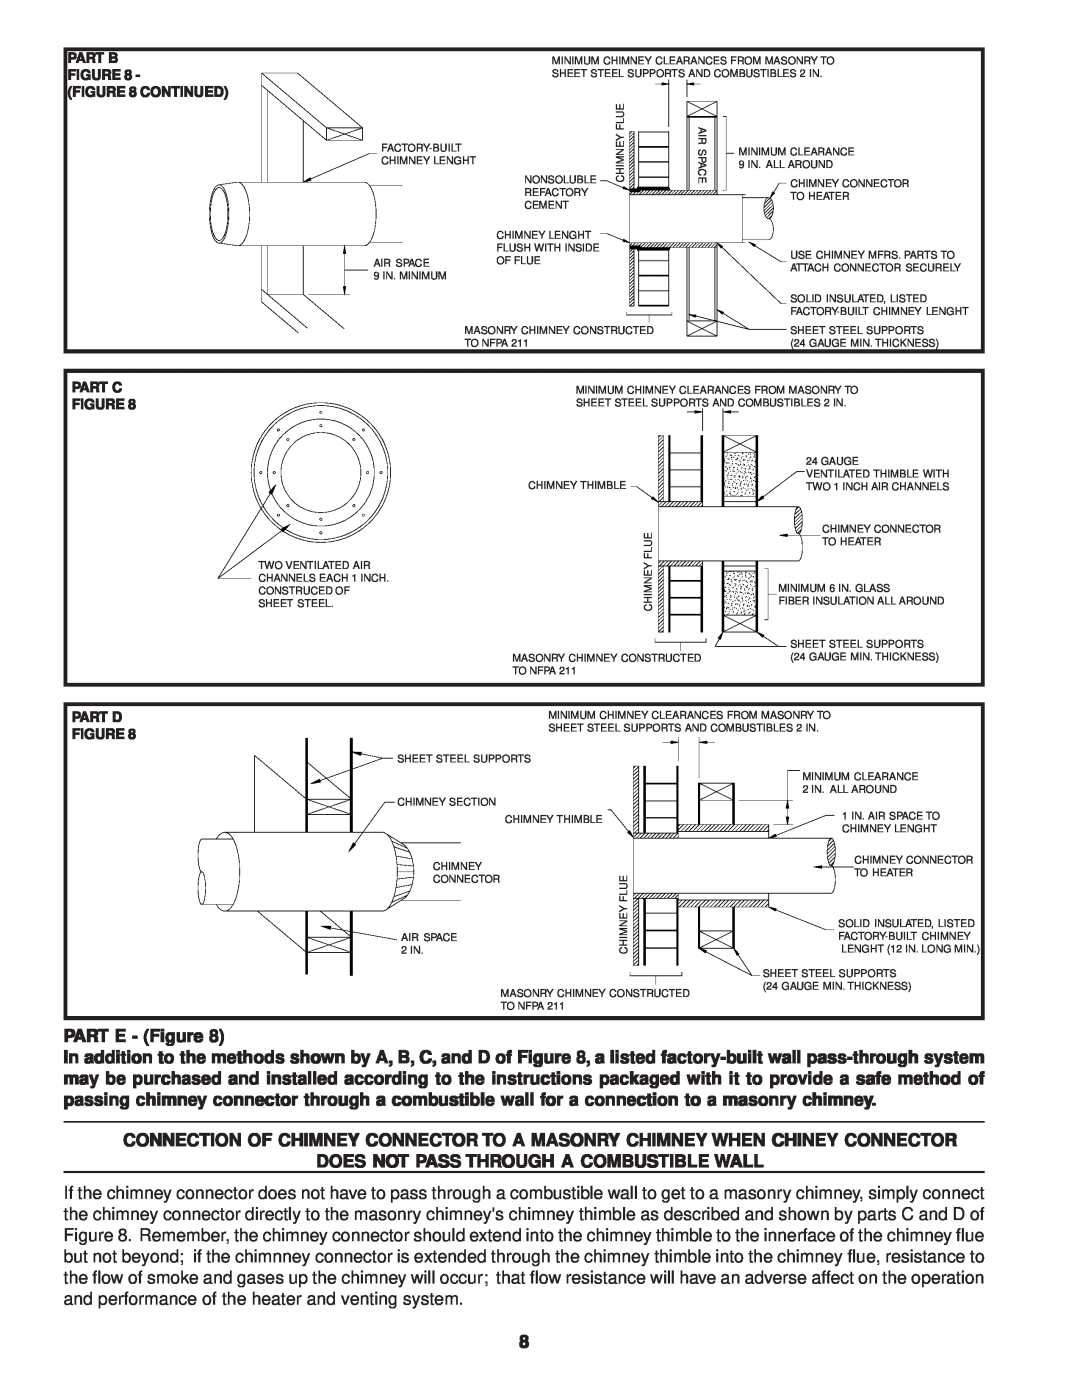 United States Stove C242 PART E - Figure, Does Not Pass Through A Combustible Wall, Part B Figure Continued, Part C Figure 